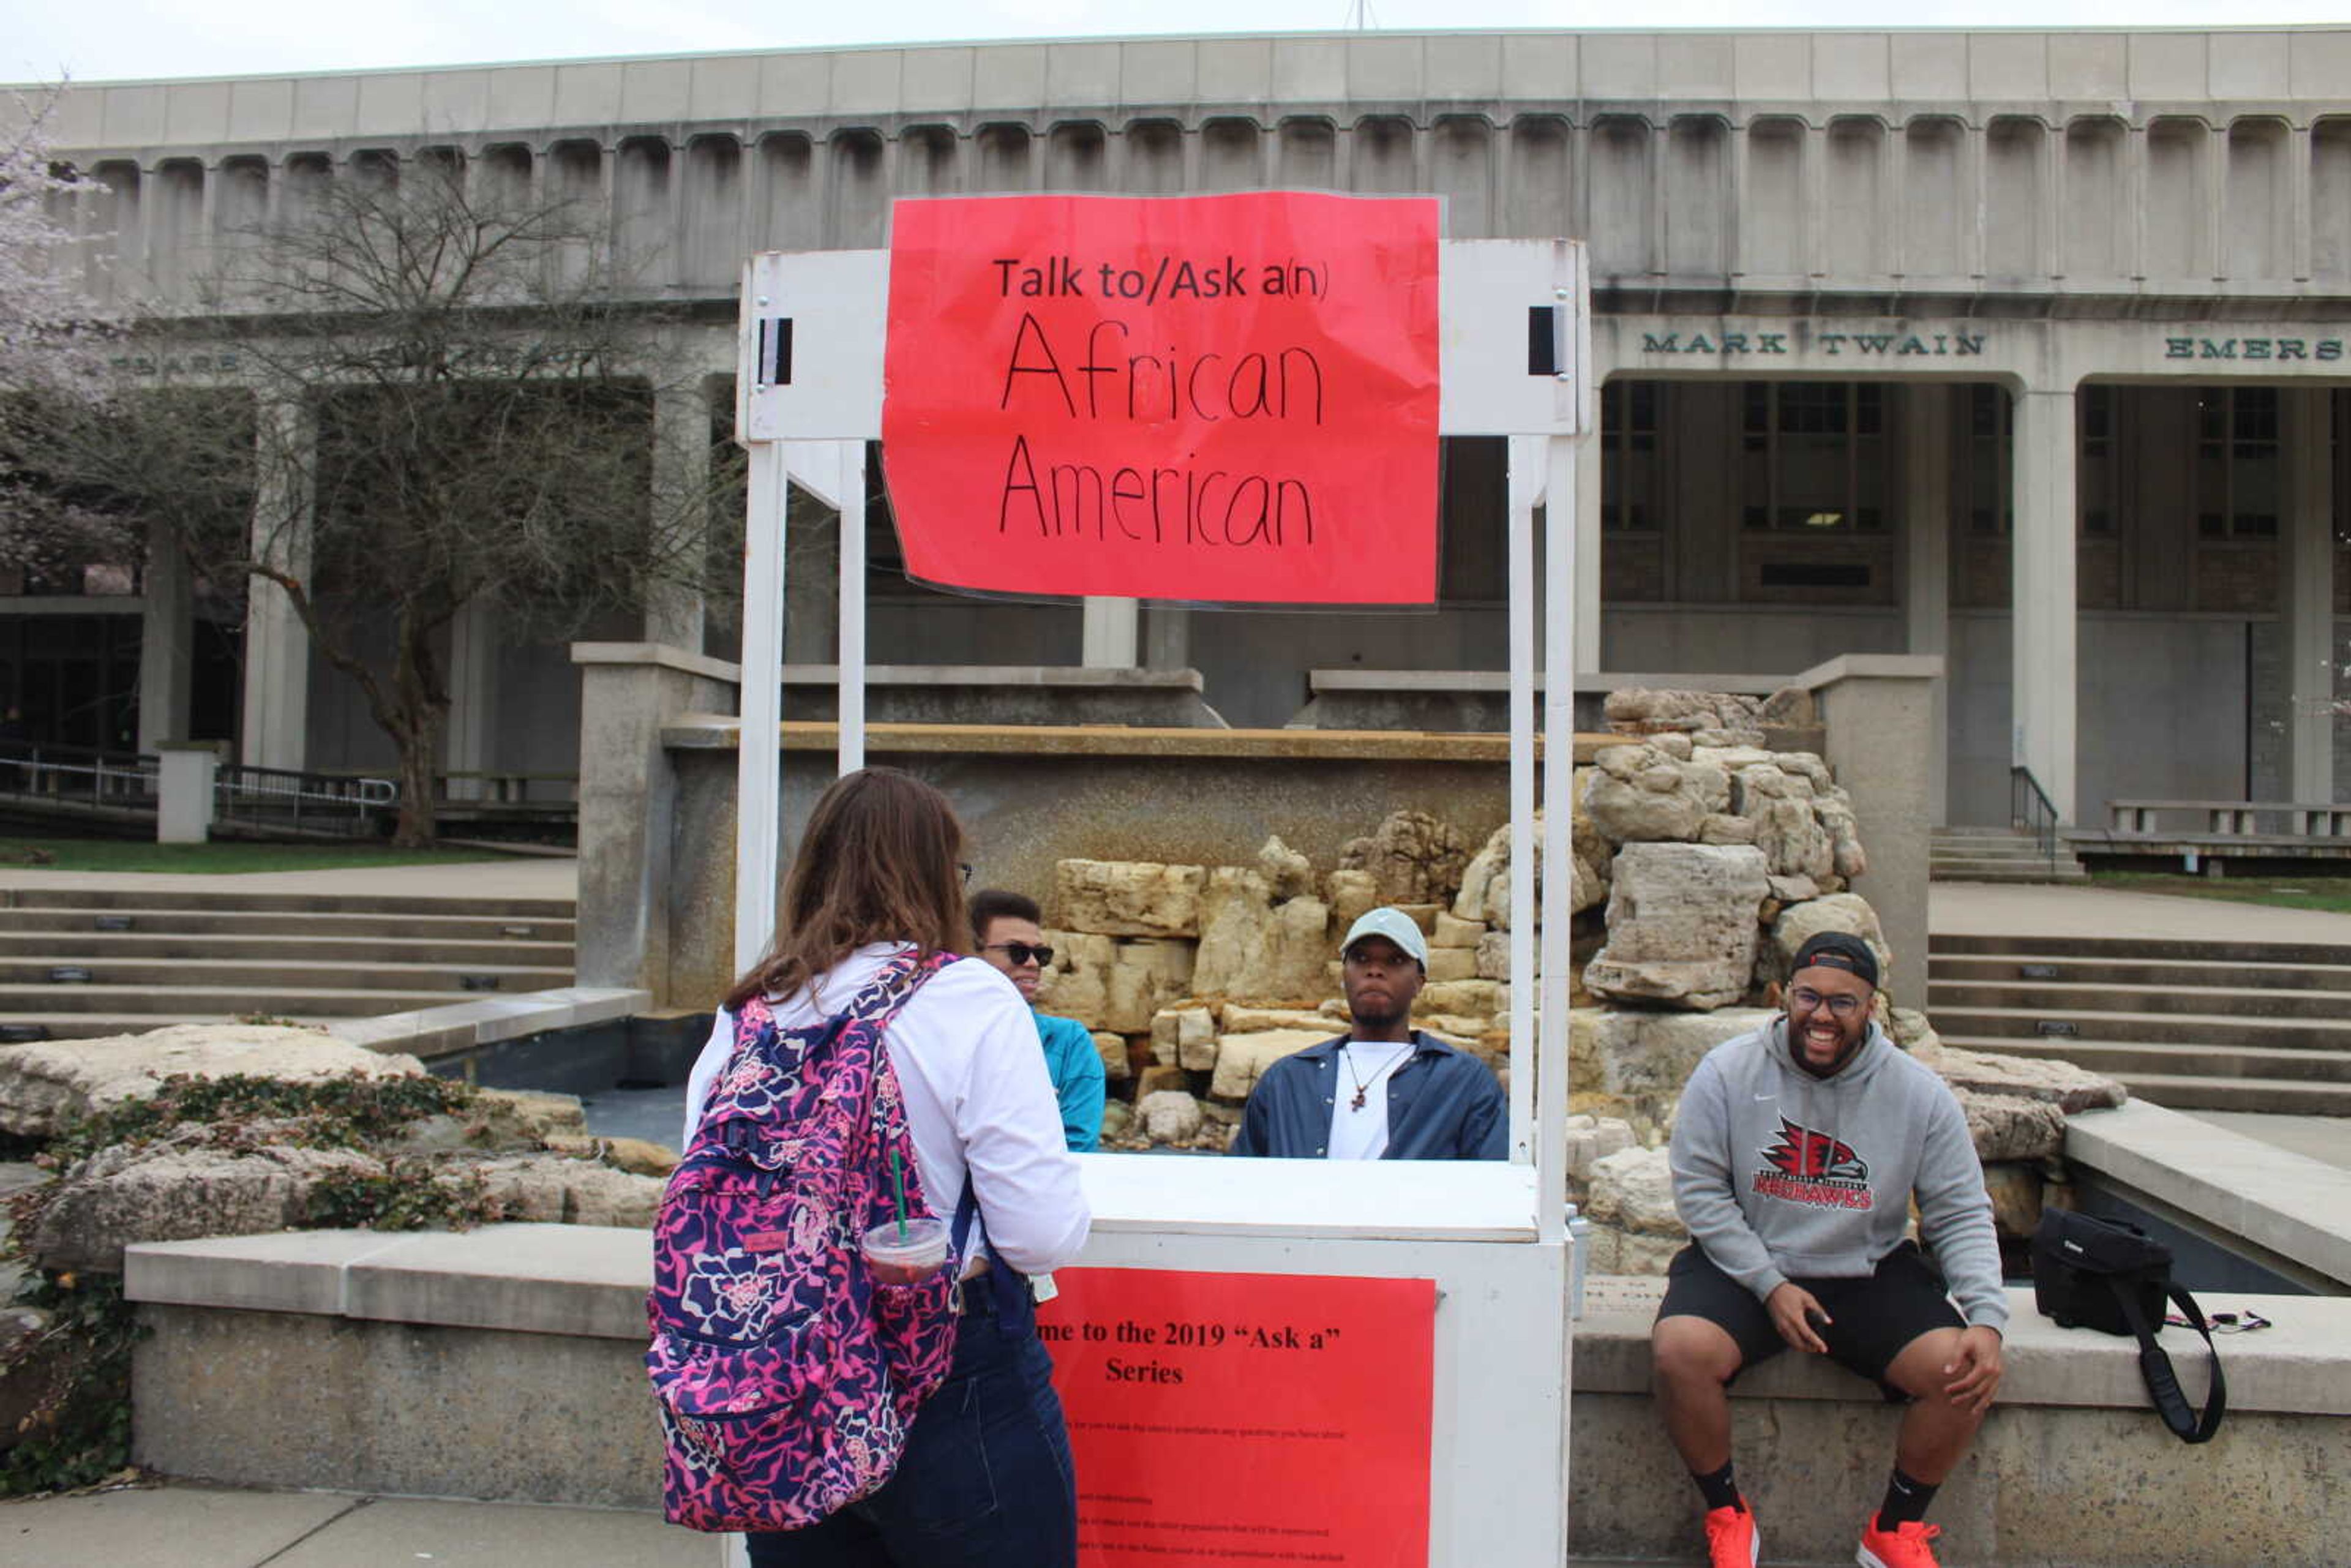 Southeast students took a stand to integrate diversity on campus by volunteering in the “Ask a Blank” series